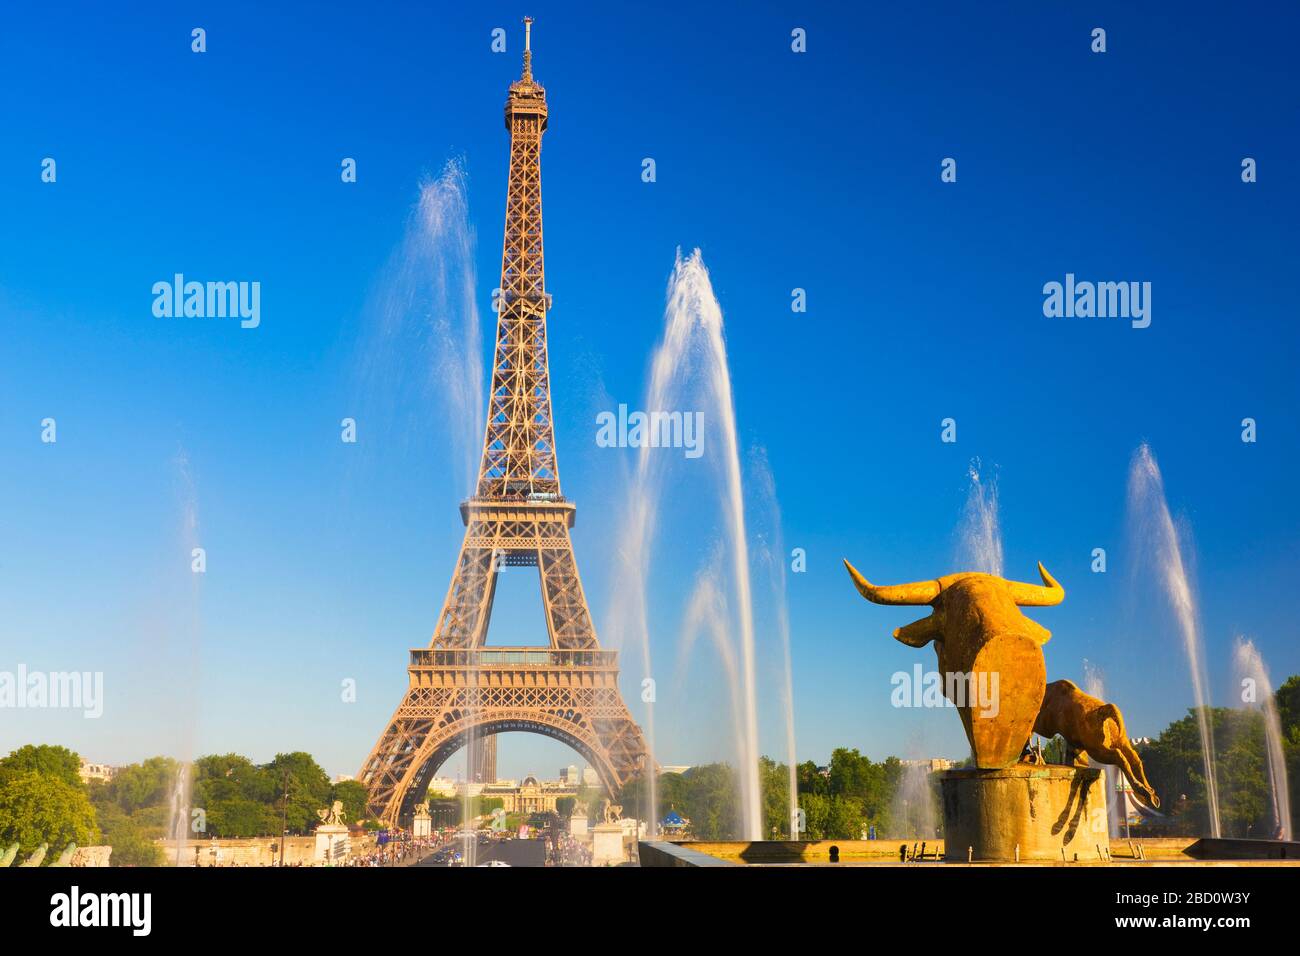 France, Ile-de-France, Paris, Effel Tower viewed from the Palais de Chaillot water fountains Stock Photo